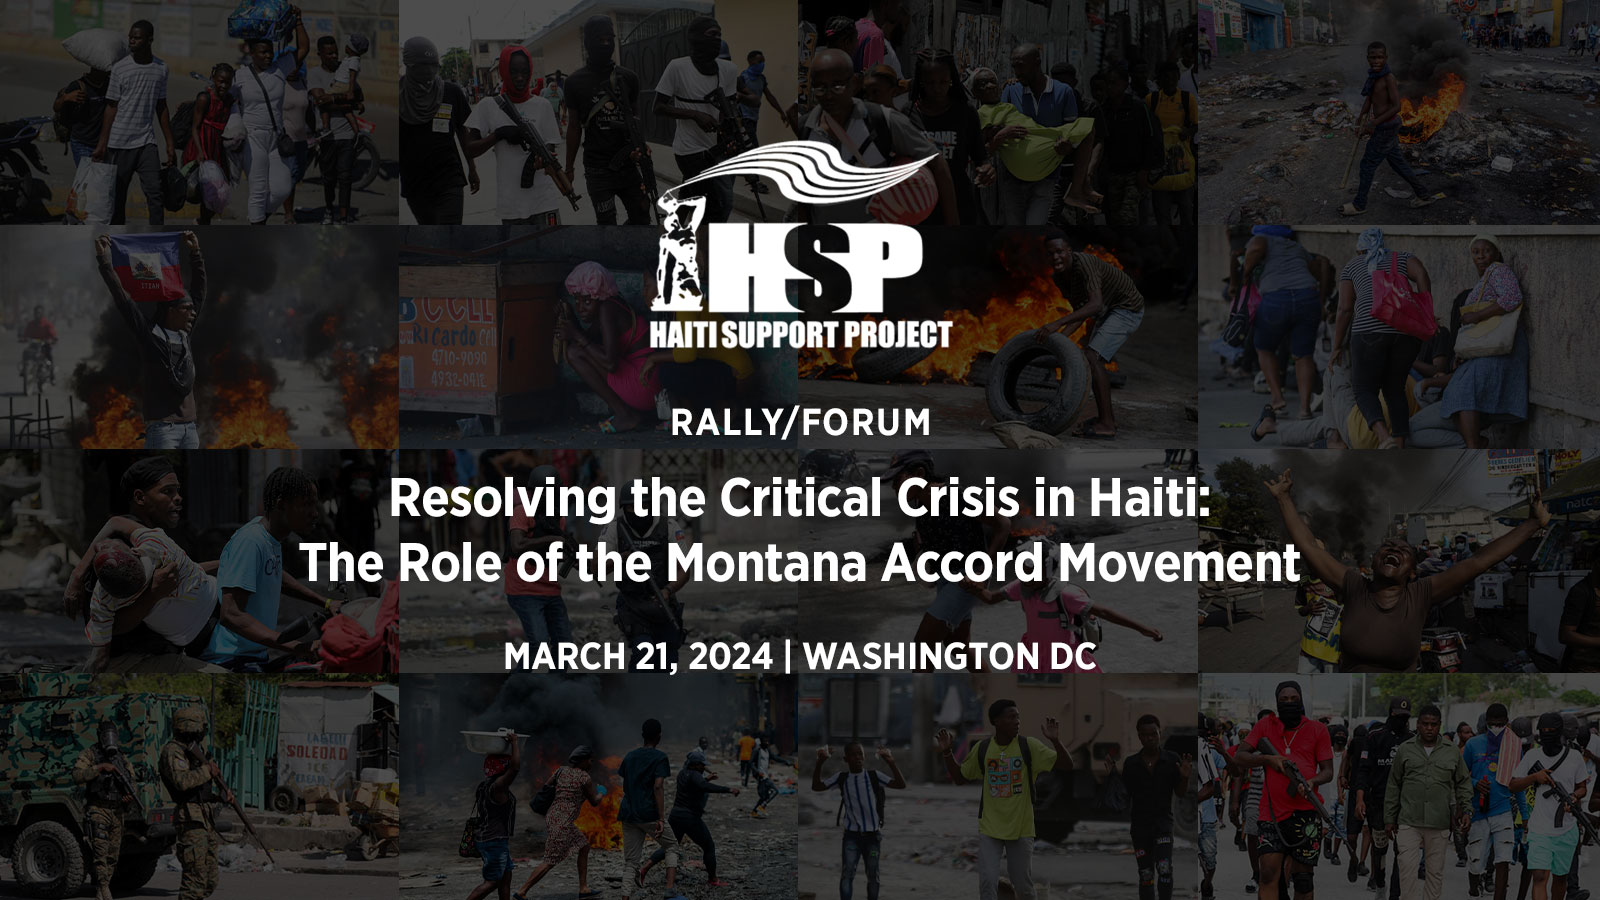 March 21st Forum/Rally: Resolving the Critical Crisis in Haiti – The Role of the Montana Accord Movement